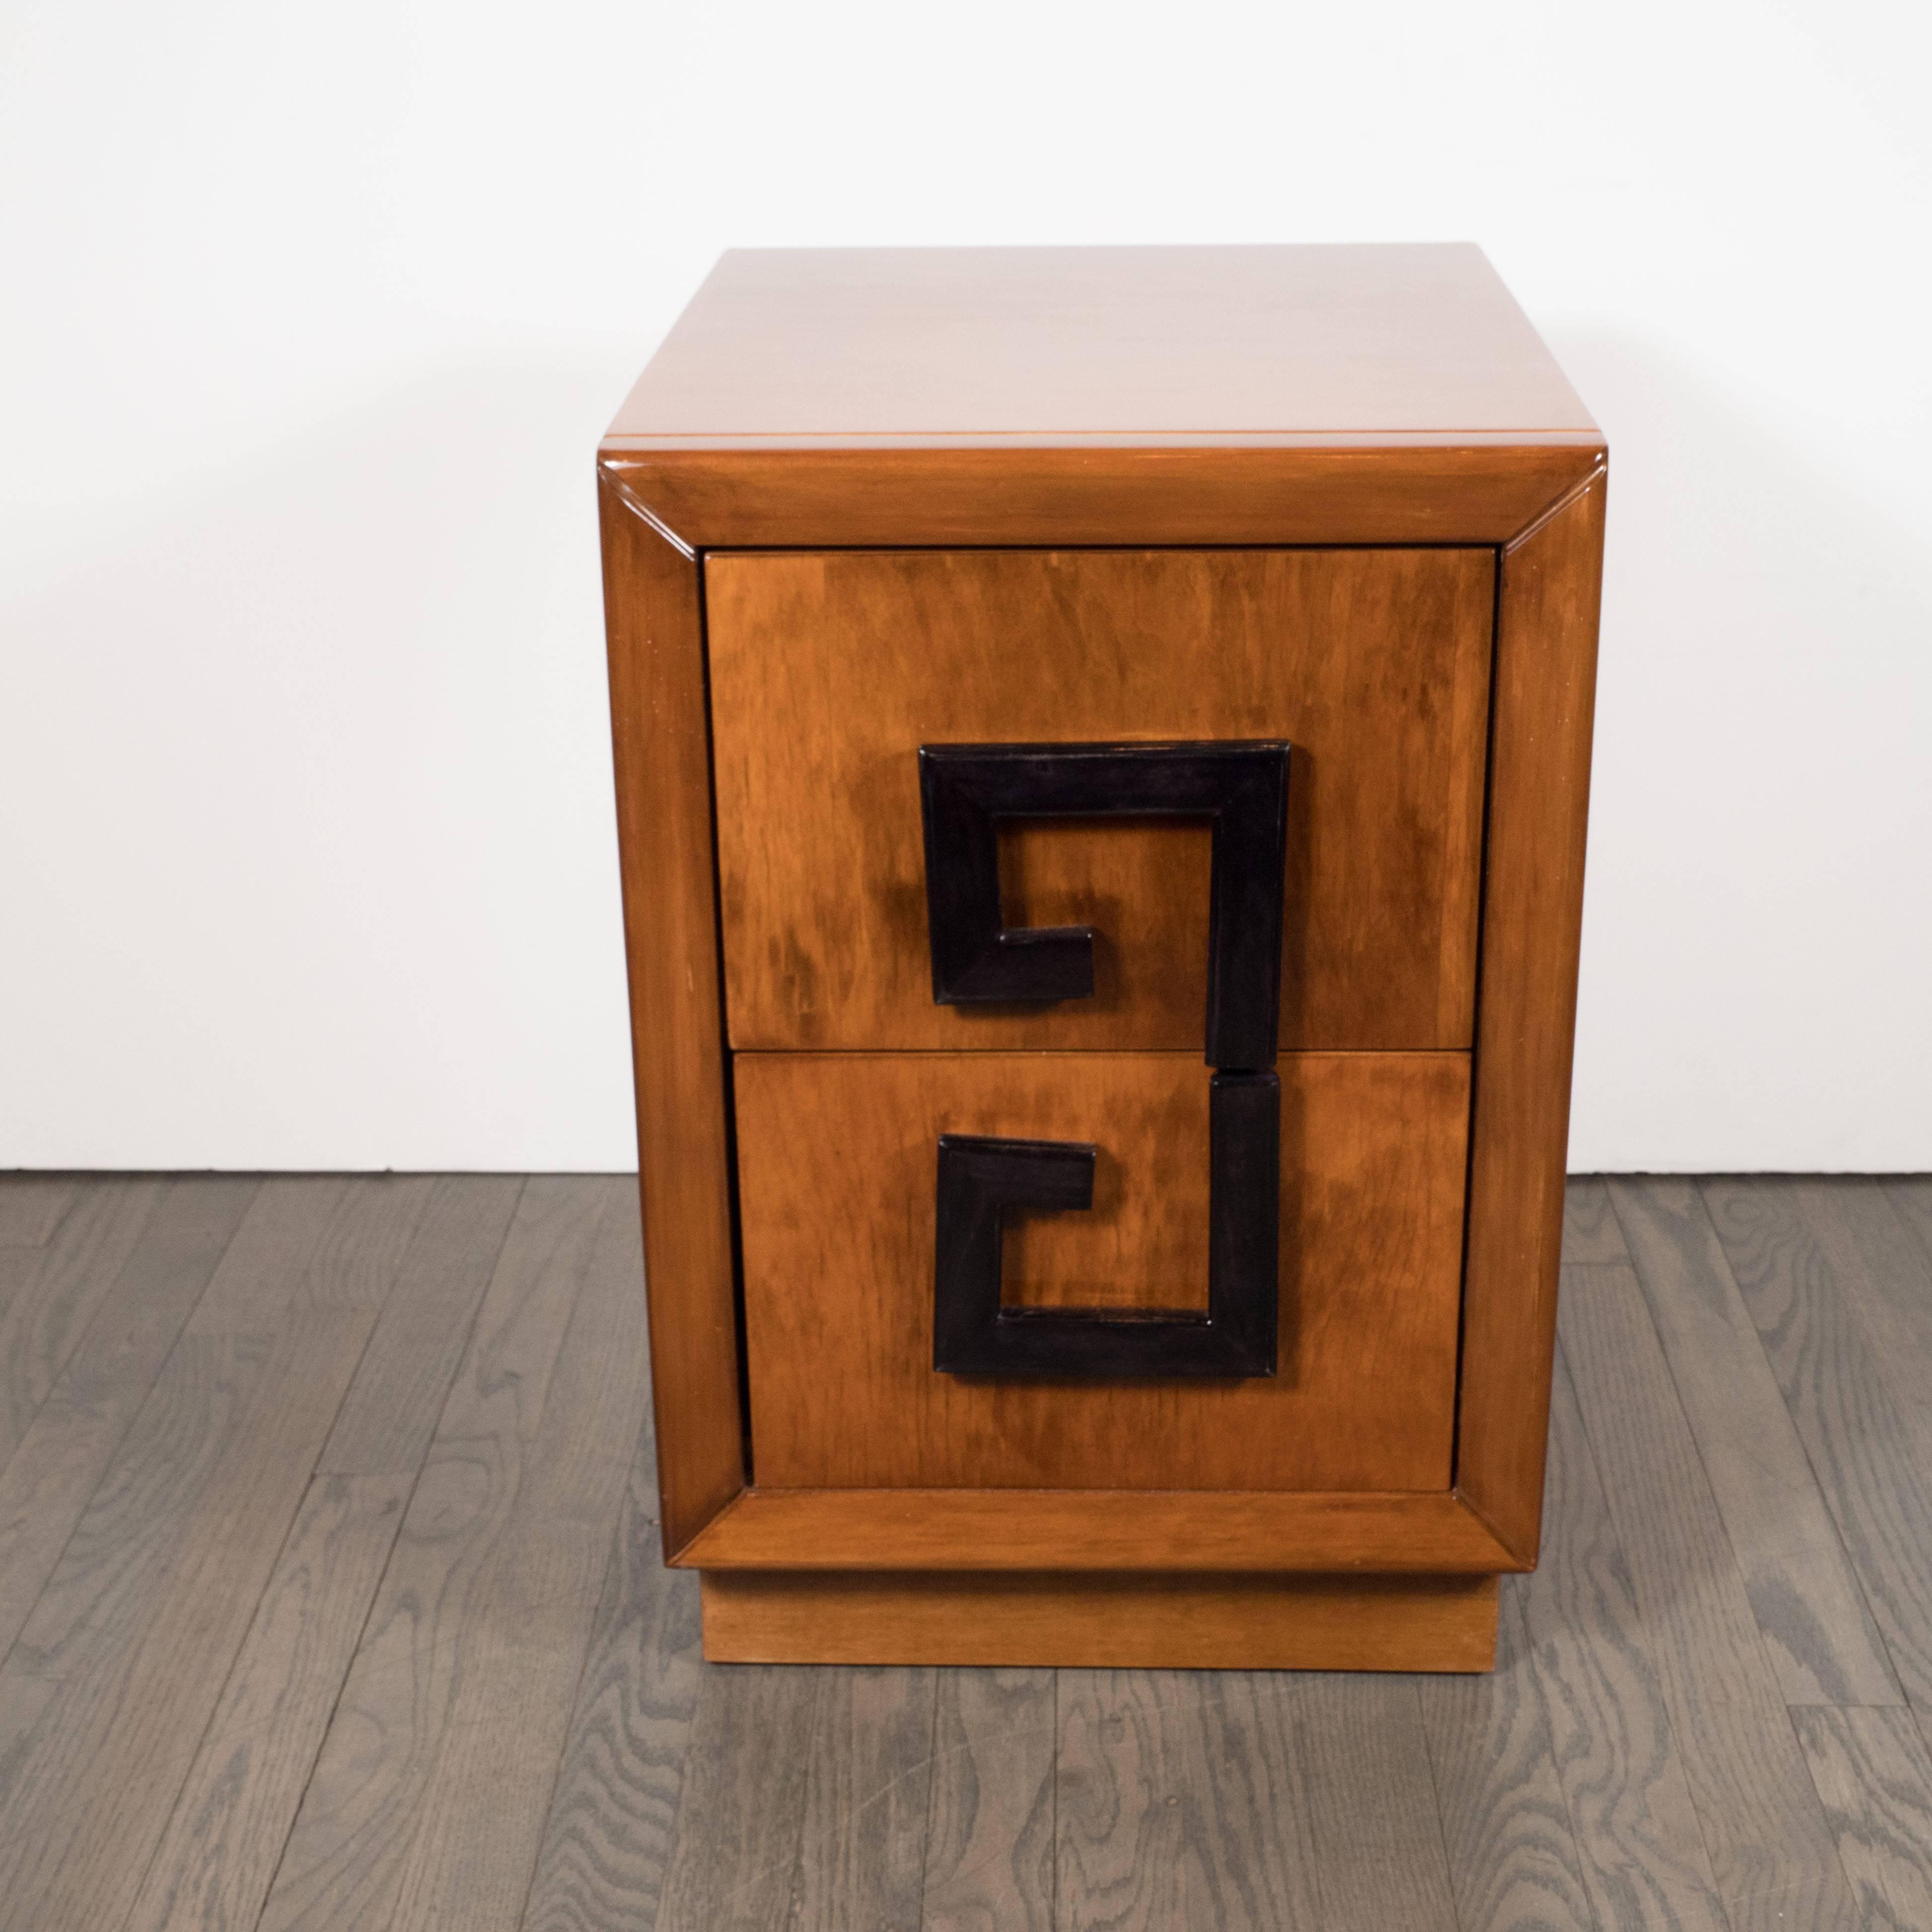 This exquisite pair of elegant Mid-Century Modernist nightstands feature a Greek key design in black lacquer, two spacious drawers and book-matched lacquered walnut. These pieces boast a particularly stunning grain in a lustrous hue of cognac. They